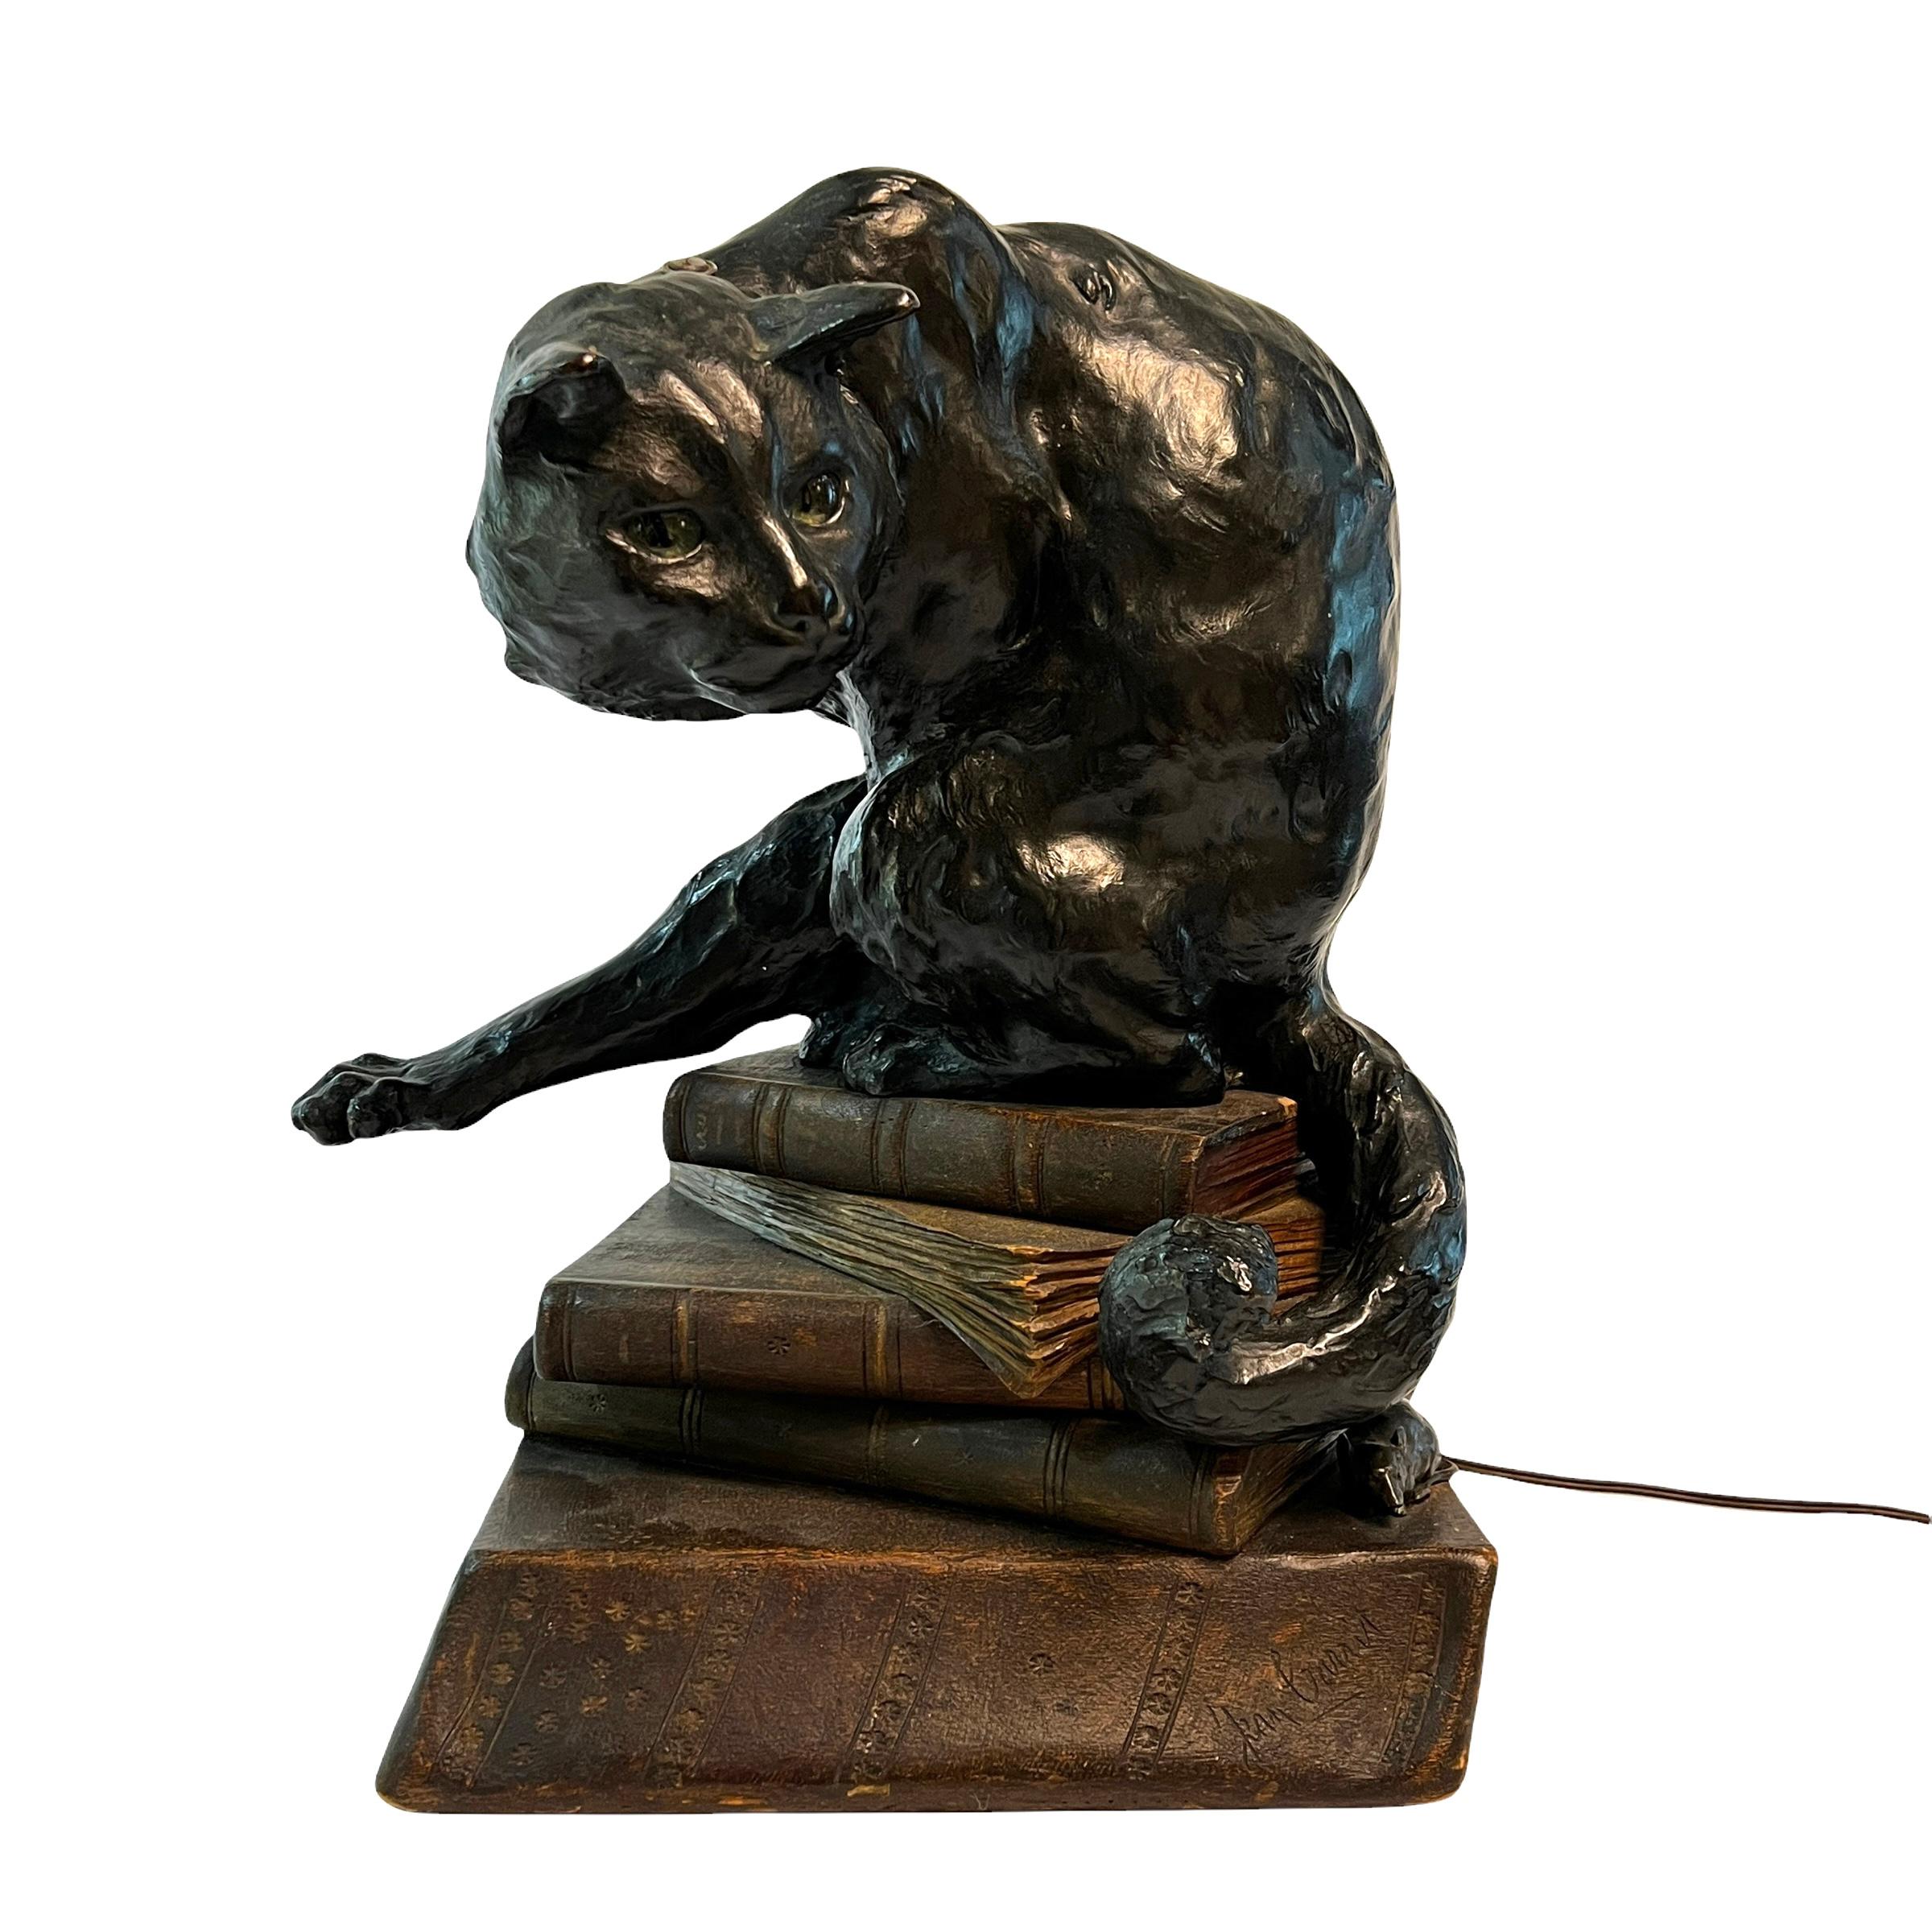 Our very rare lighted sculpture by the French artist, Jean Carrit, depicts a cat perched atop a stack of books with a mouse hiding beneath. Exquisitely sculpted and cast in bronze with dark brown patina, mounted on a base of stacked books carved